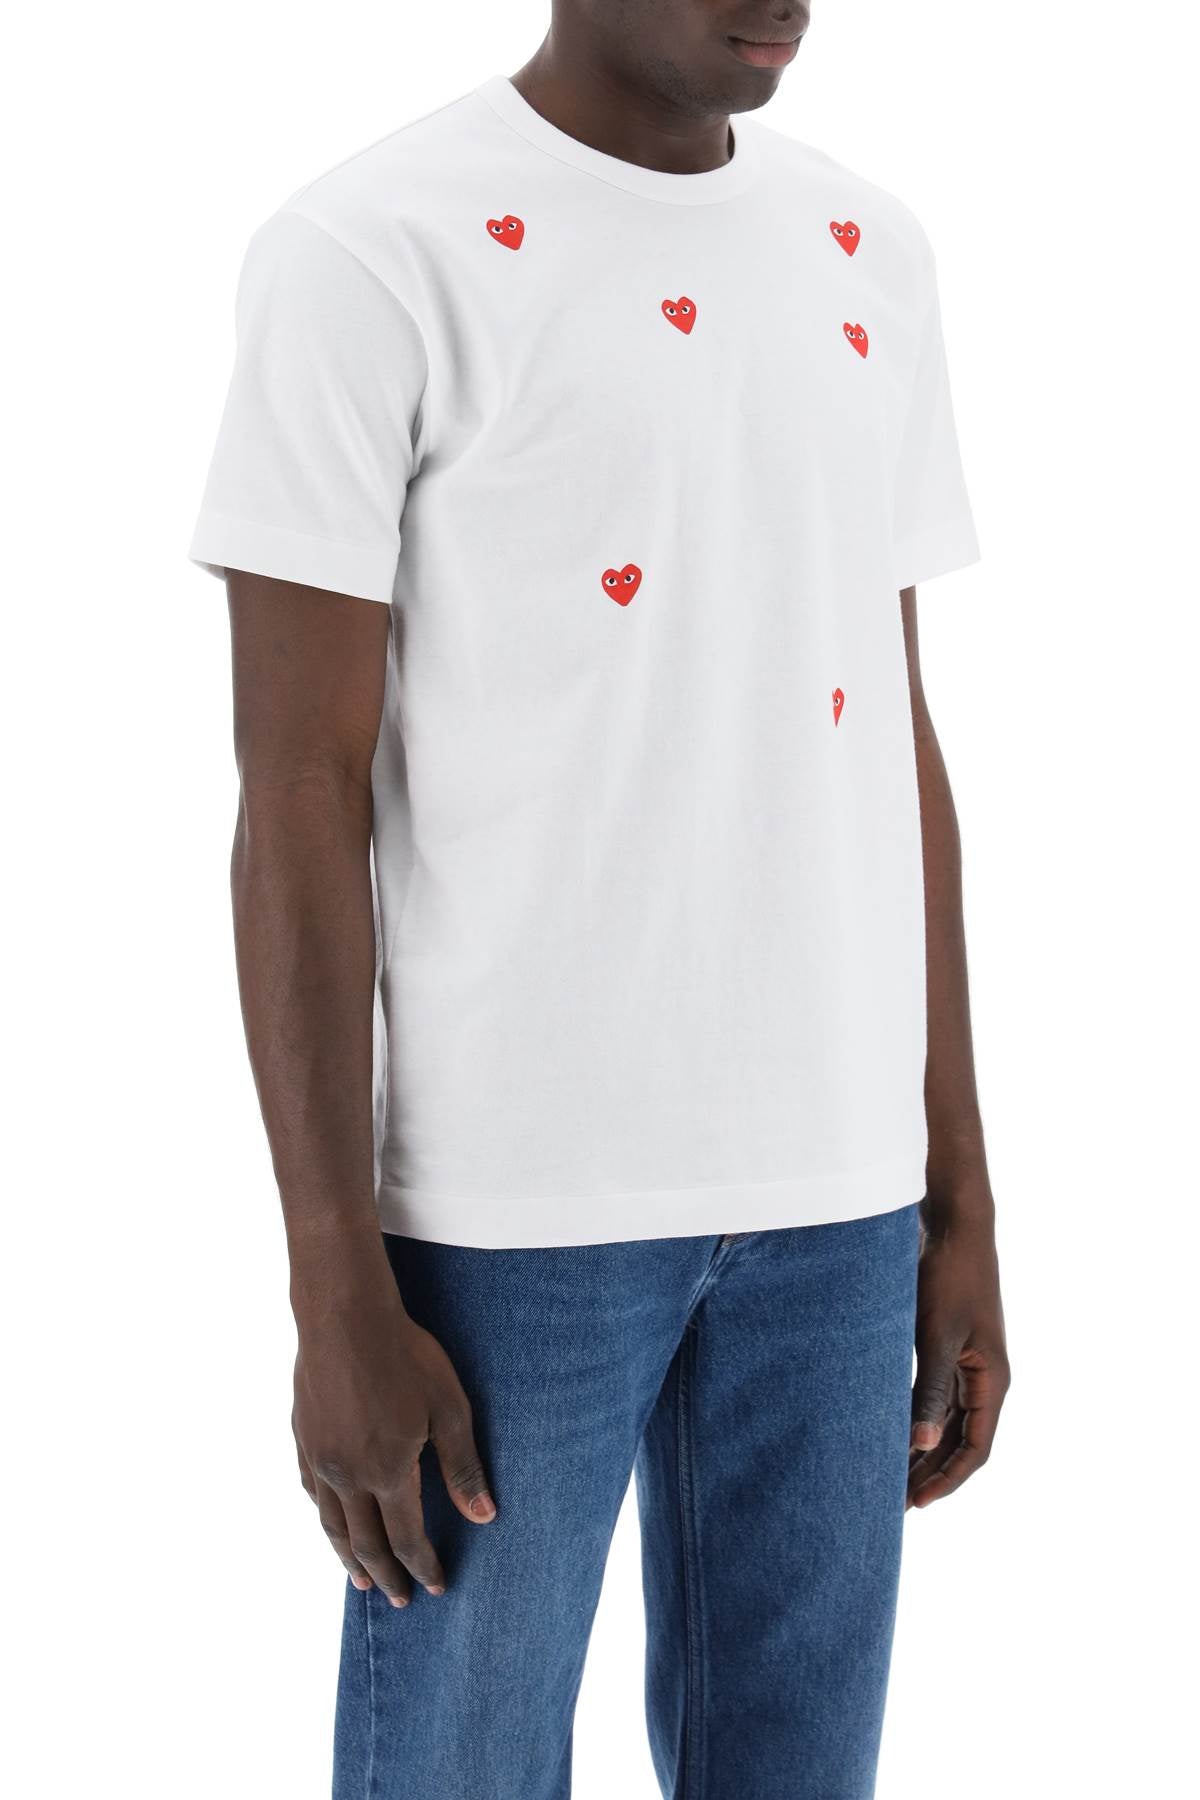 "round-neck t-shirt with heart pattern-1